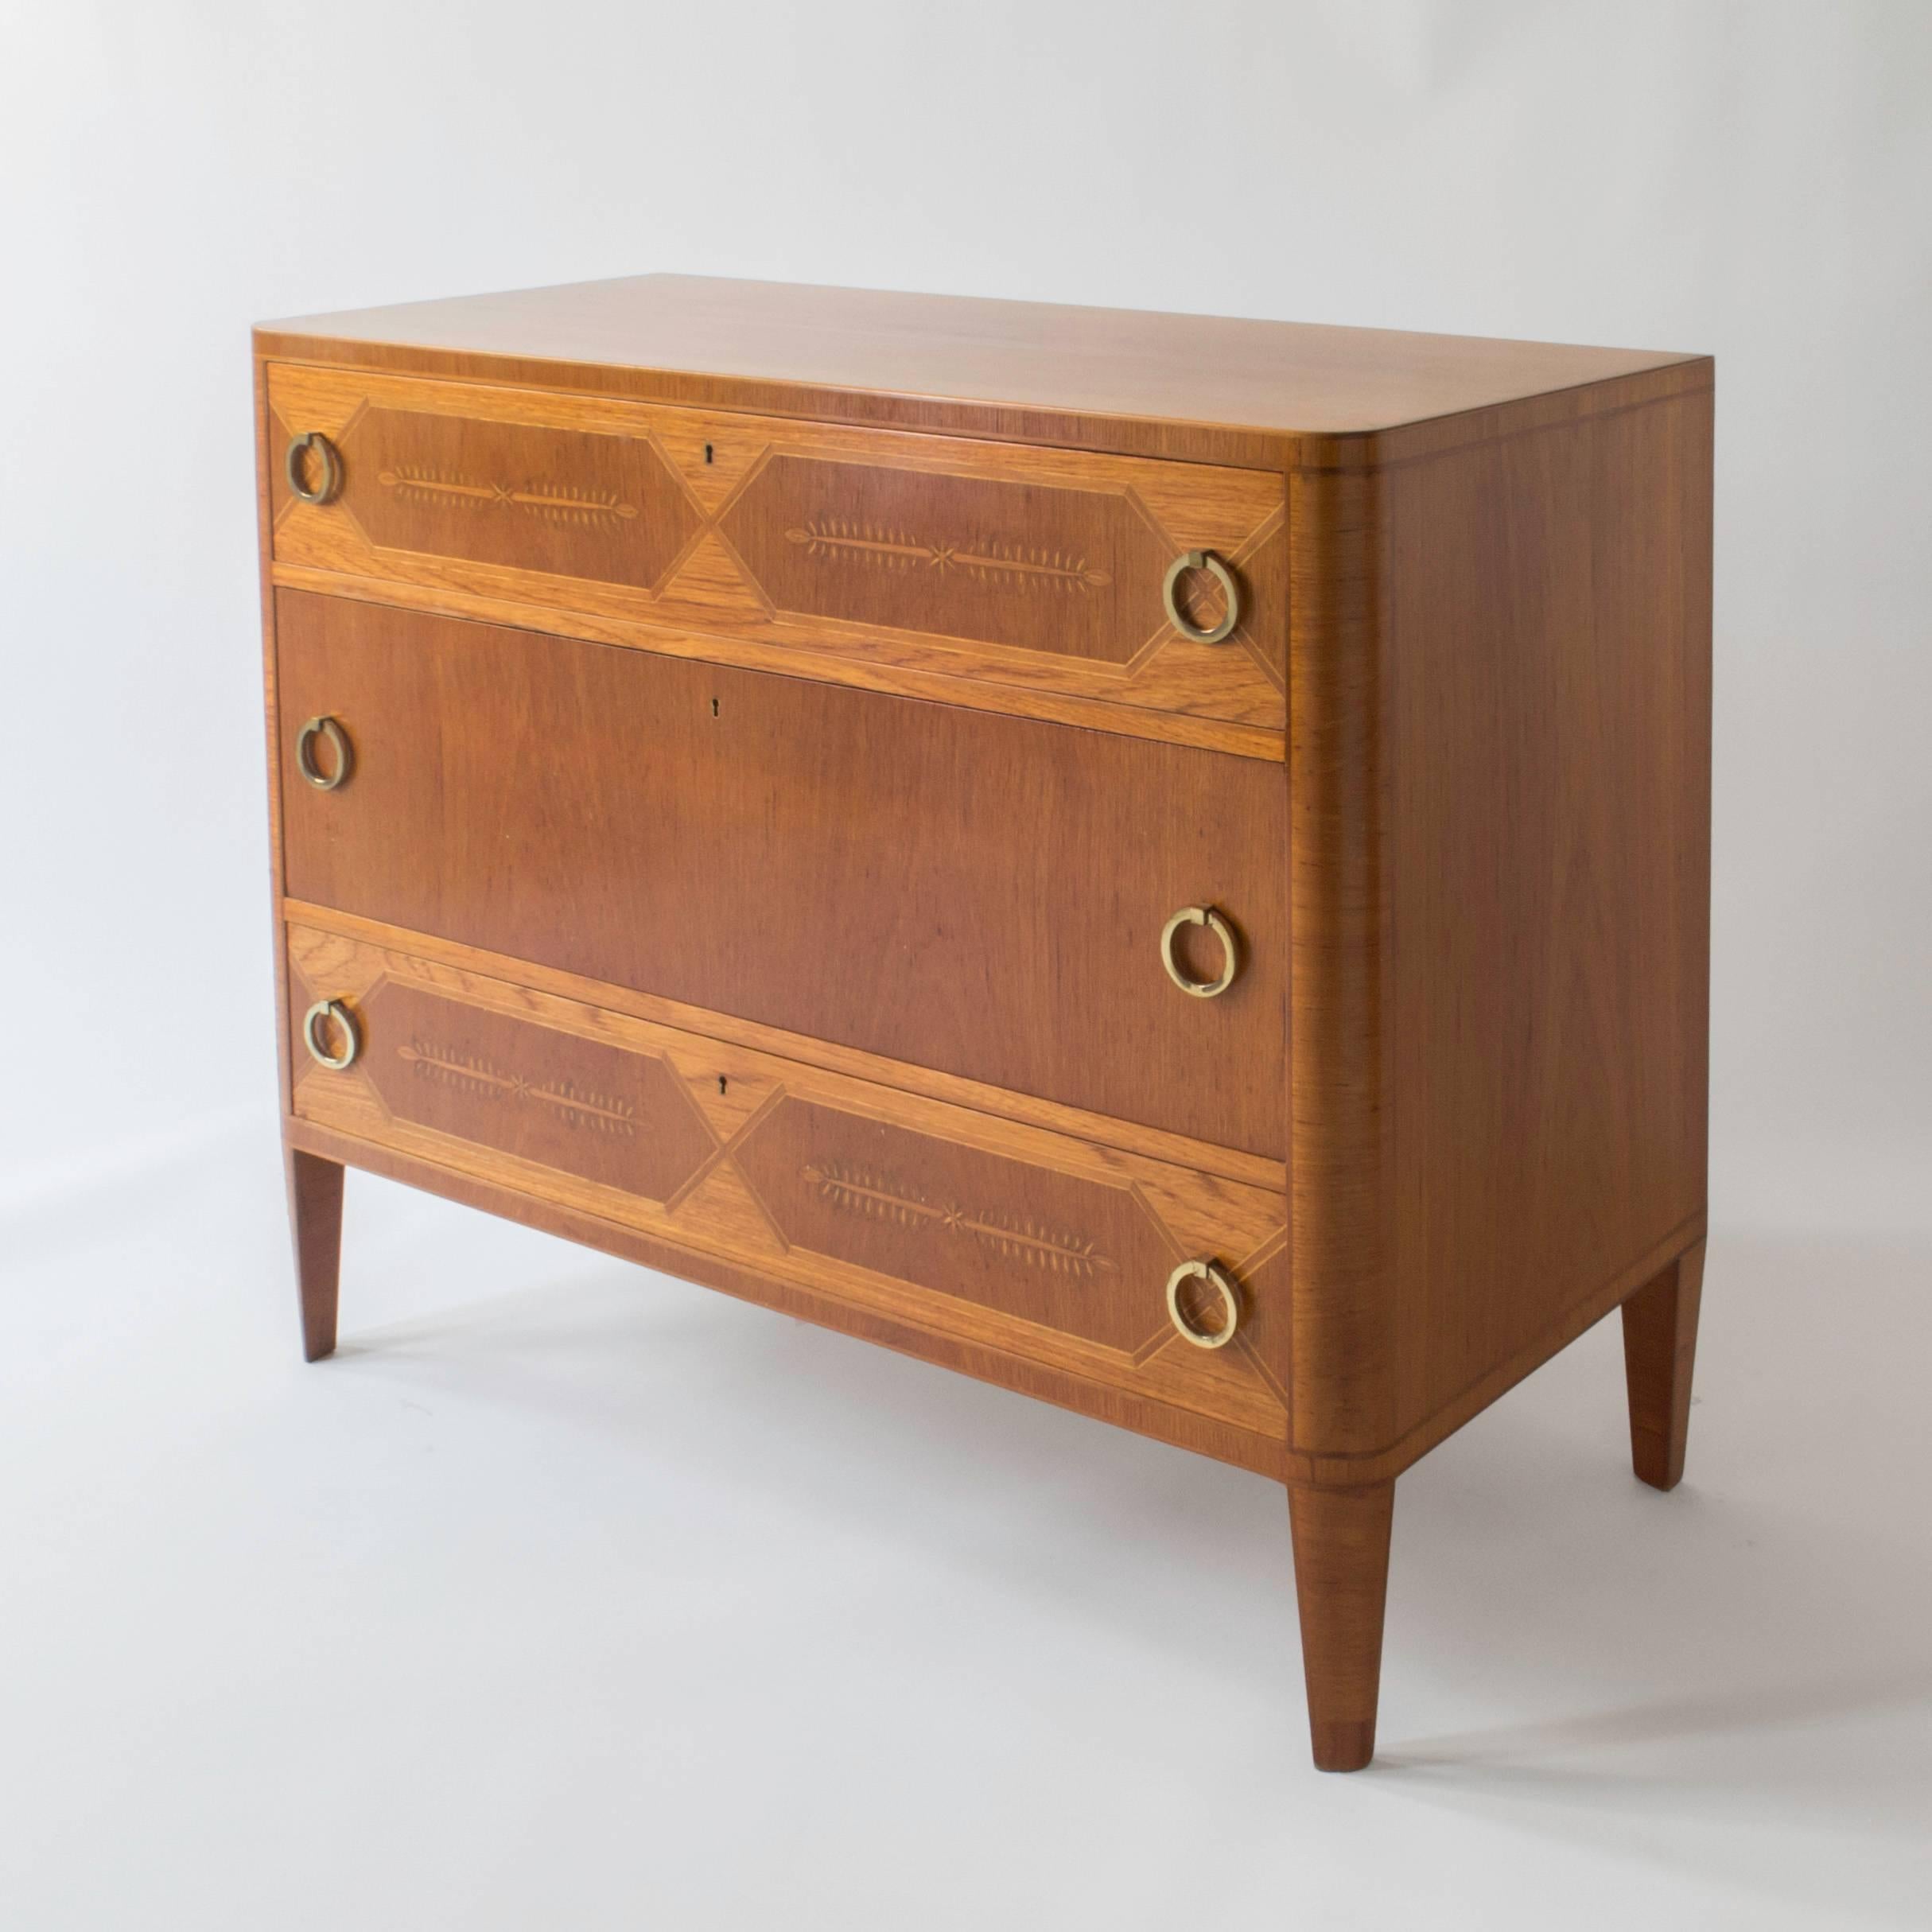 A subtle, beautifully constructed and highly sophisticated piece.

The rectangular top with rounded front corners, above three stacked drawers, the top and bottom drawers displaying x-form reserves centring stylized garland marquetry, the exterior